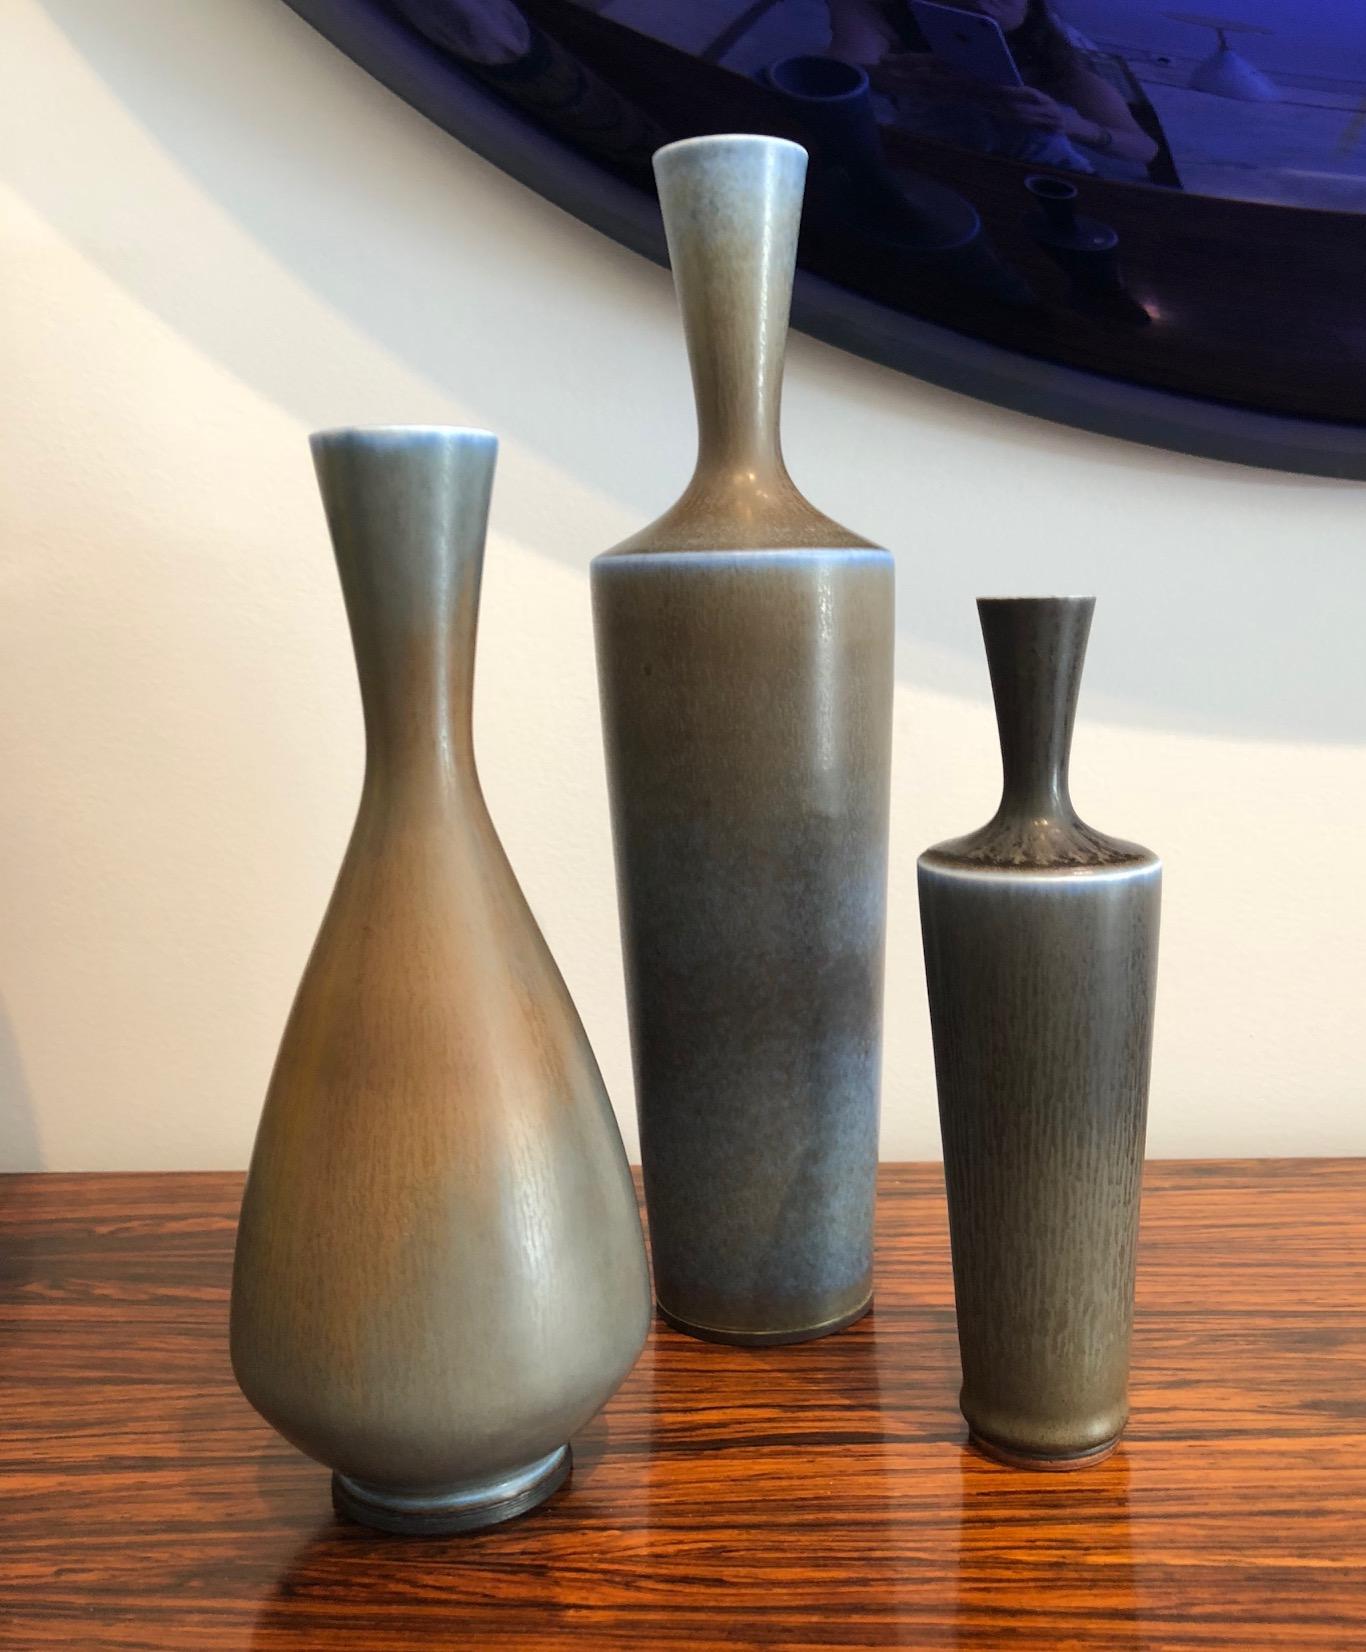 Variation of brown and blue enamel three vases
Measure: H 29 / H 22 / H 19 cm
All vases signed
From 1960s
Mint condition.